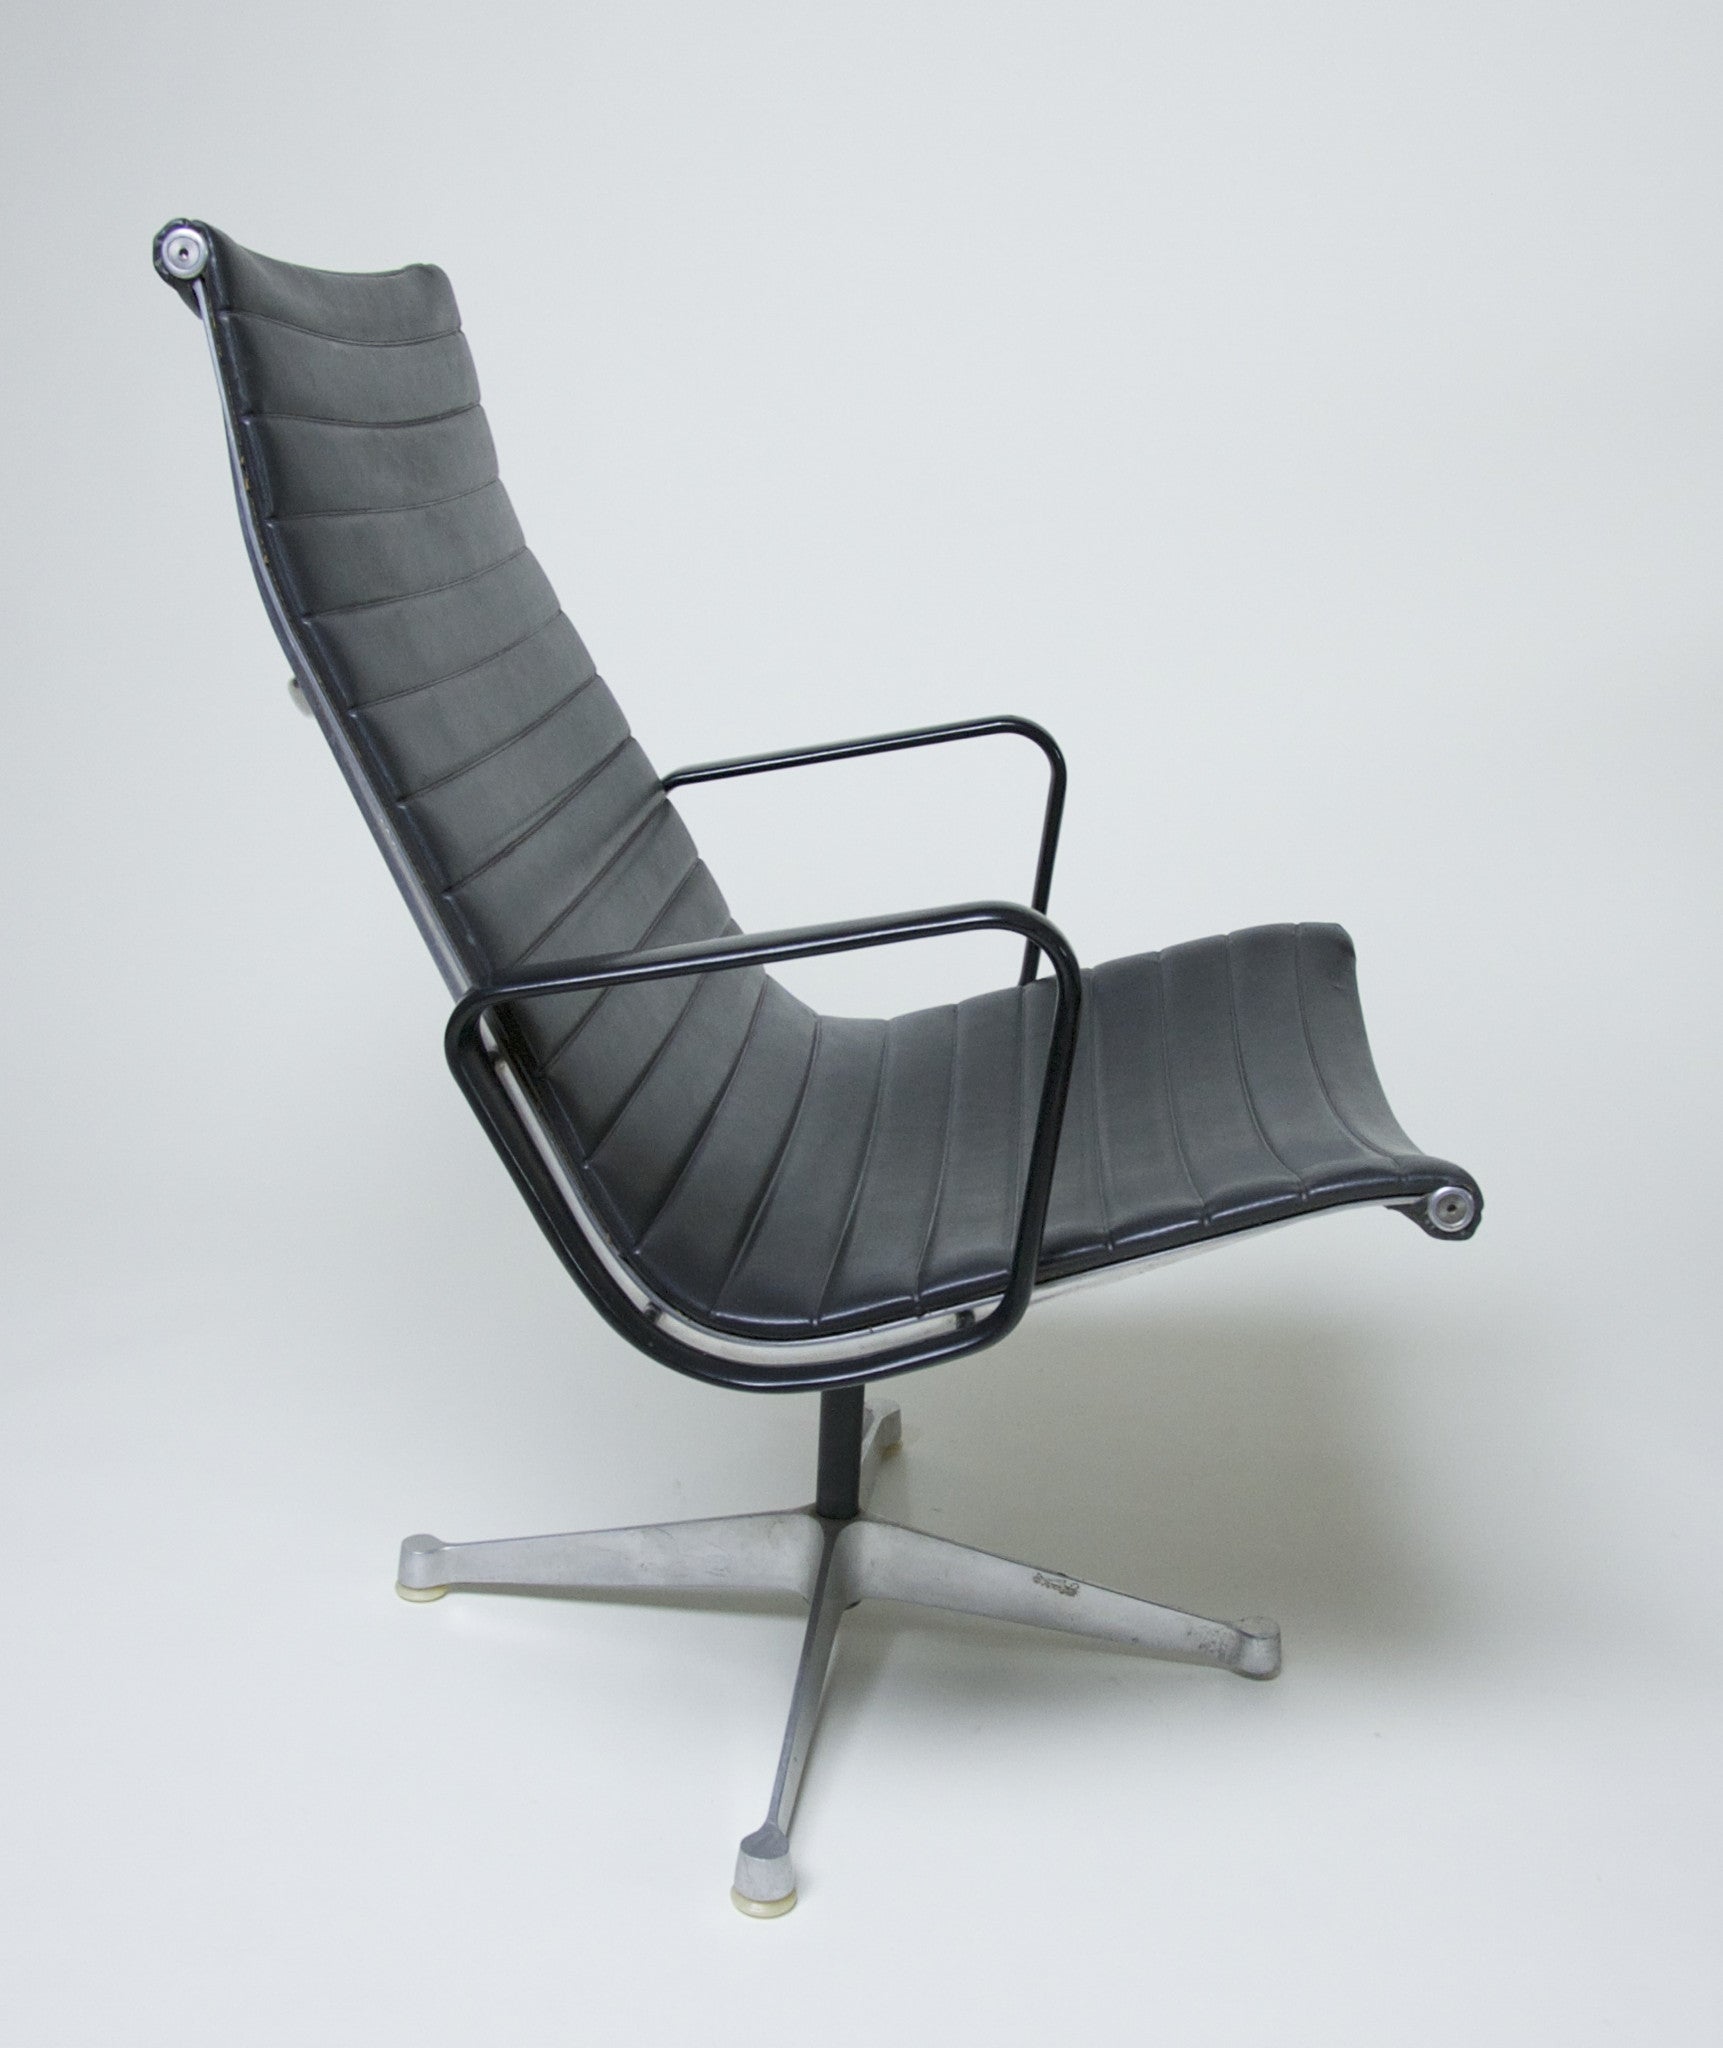 SOLD Patent Pending Eames Aluminum Group Lounge Chair #2